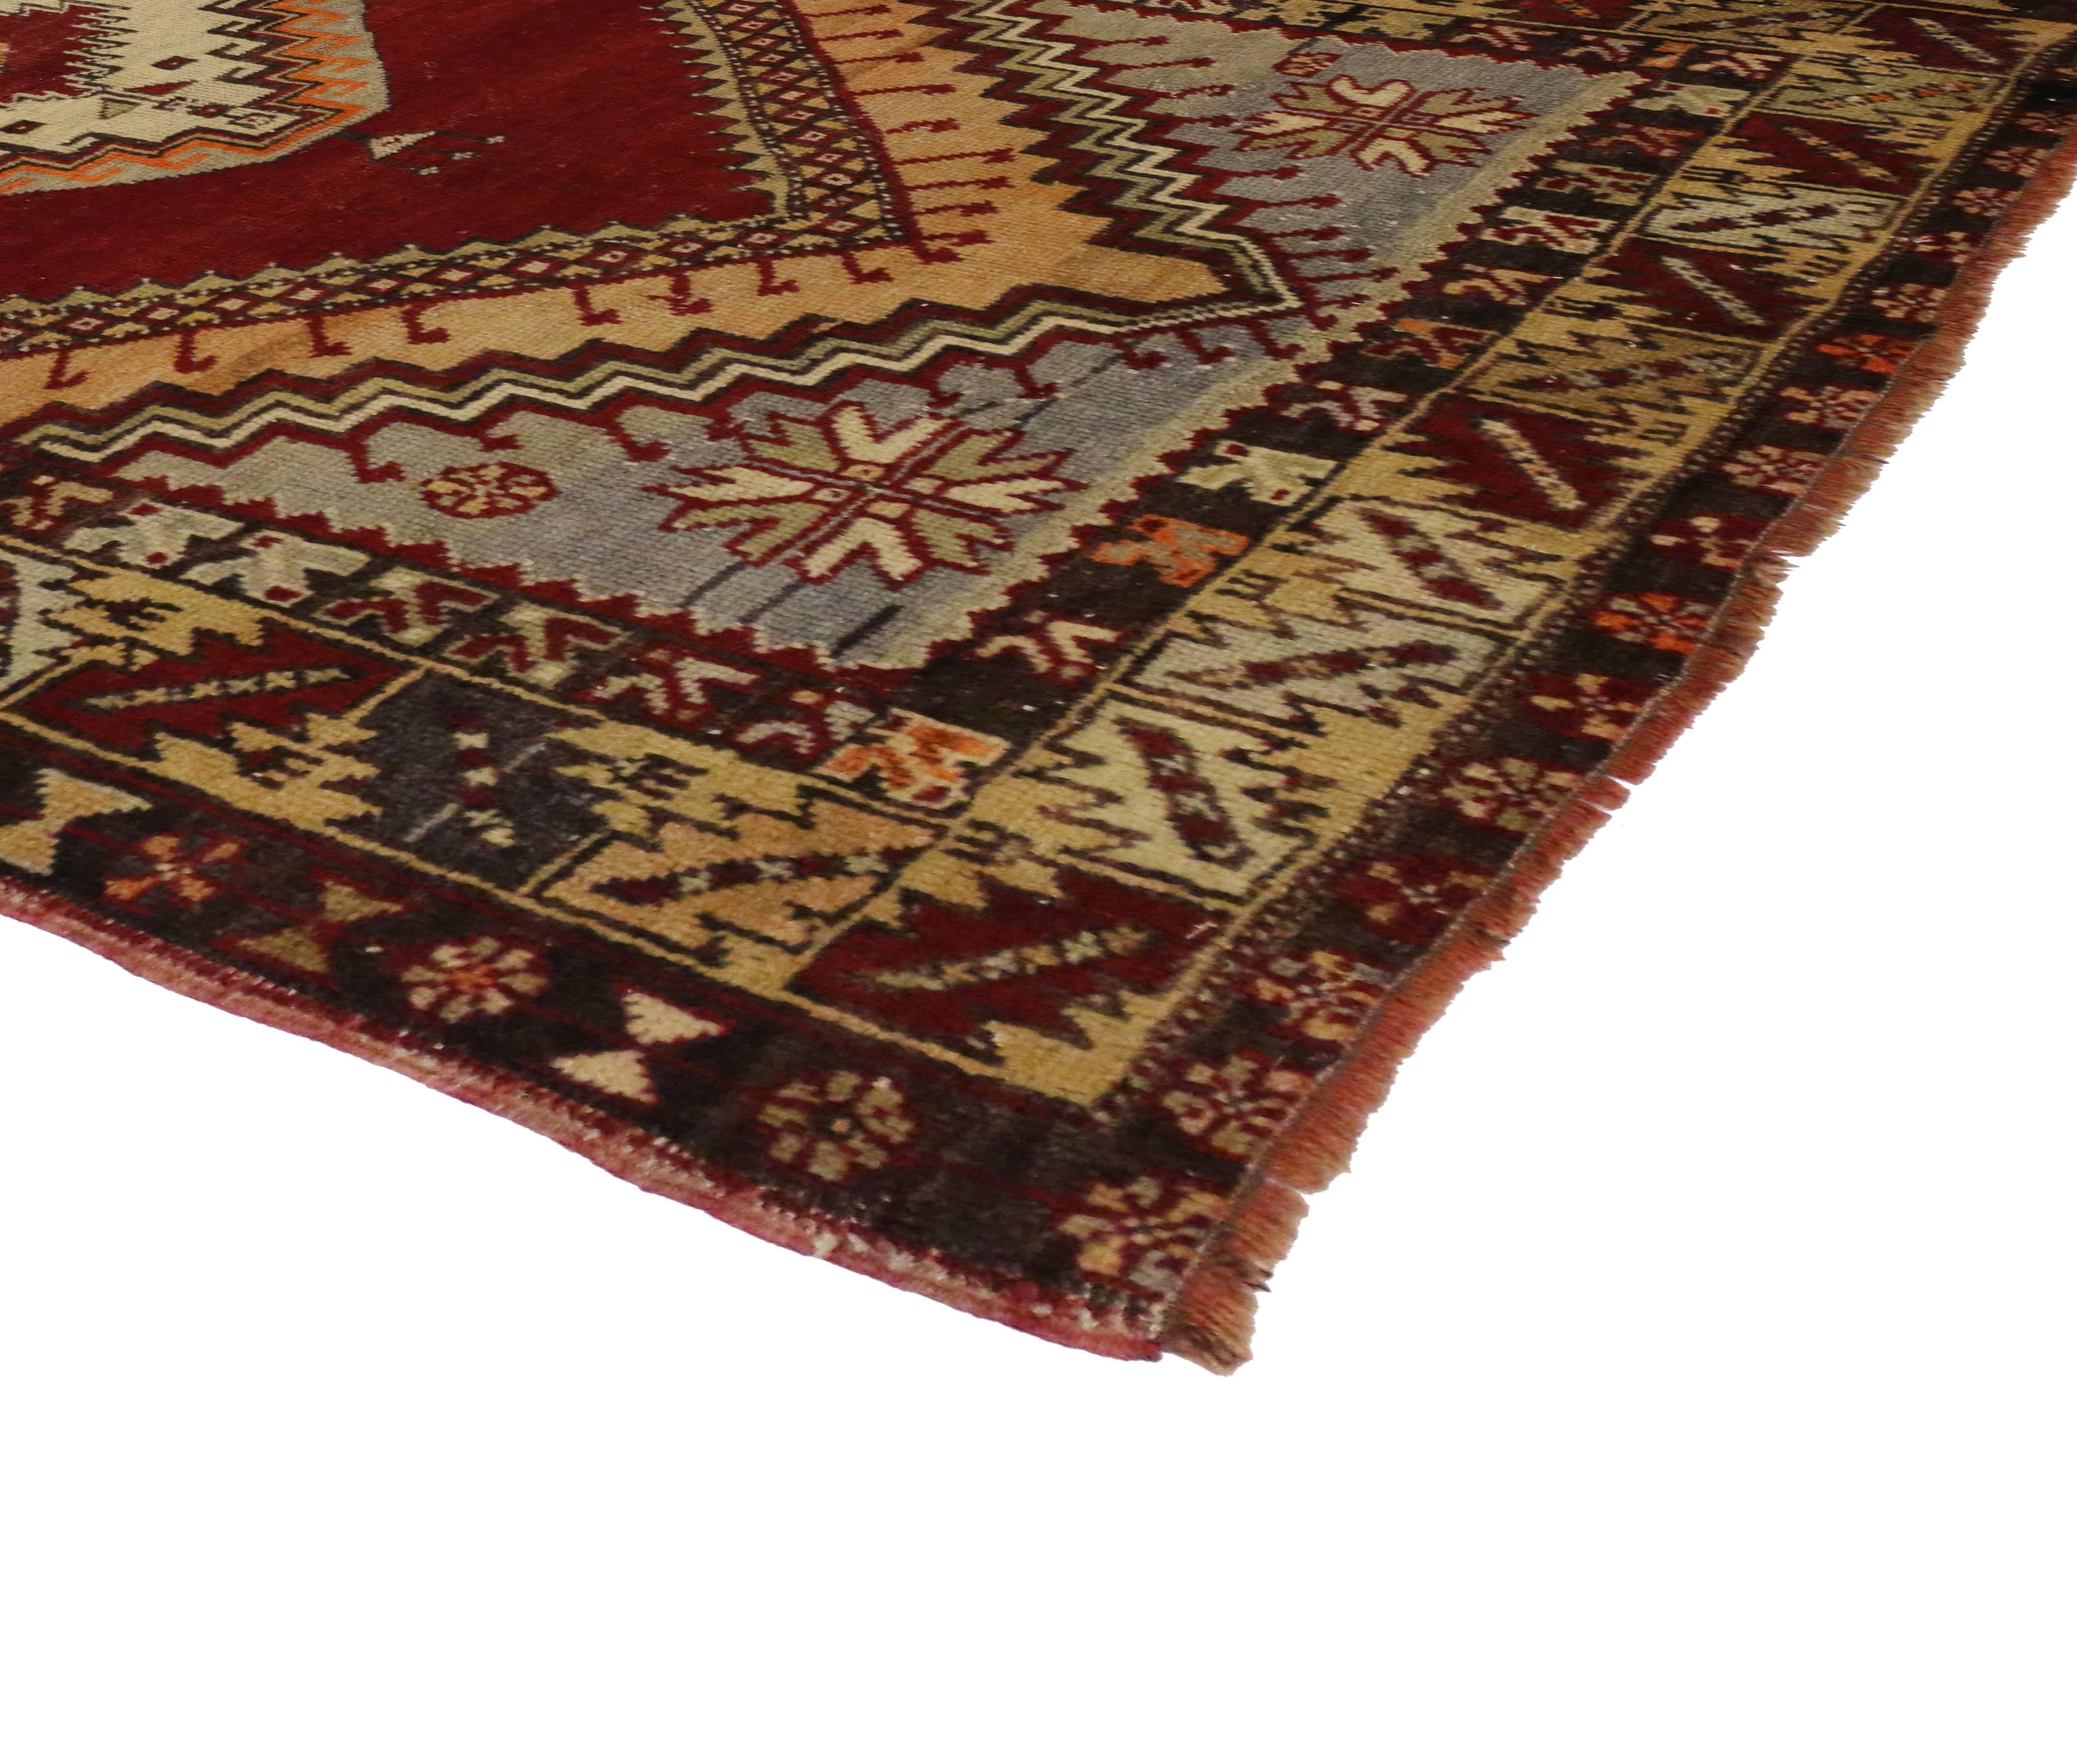 51390, vintage Turkish Oushak Accent rug, entry or foyer rug. This vintage Turkish Oushak rug features a modern traditional style. Immersed in Anatolian history and refined colors, this vintage Oushak rug combines simplicity with sophistication.